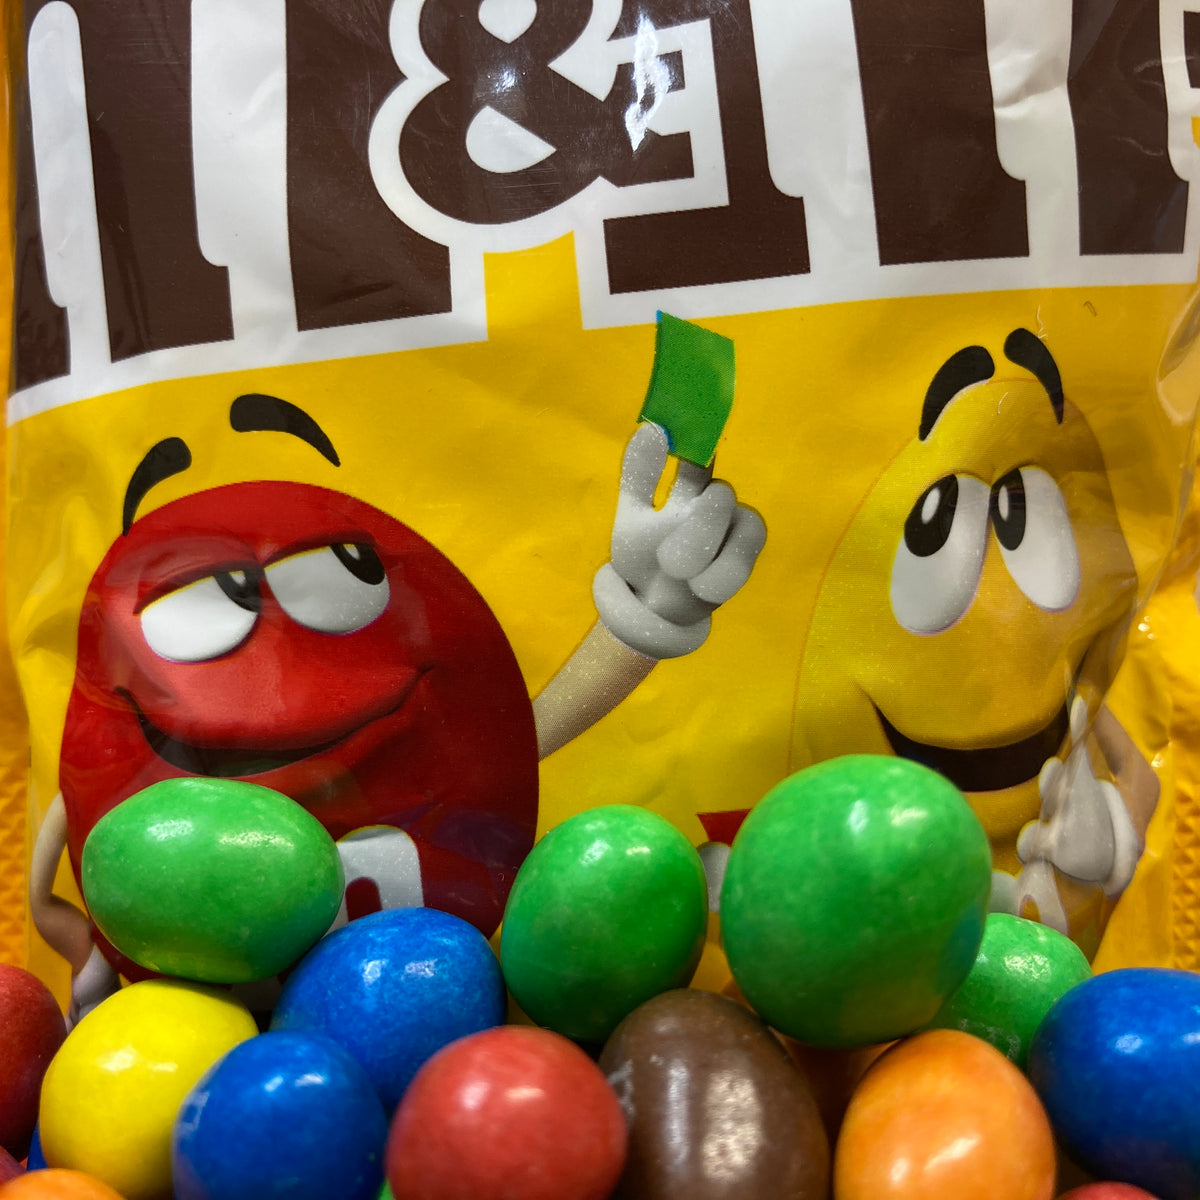 M&M's Peanut Chocolate More To Share Pouch 268 G